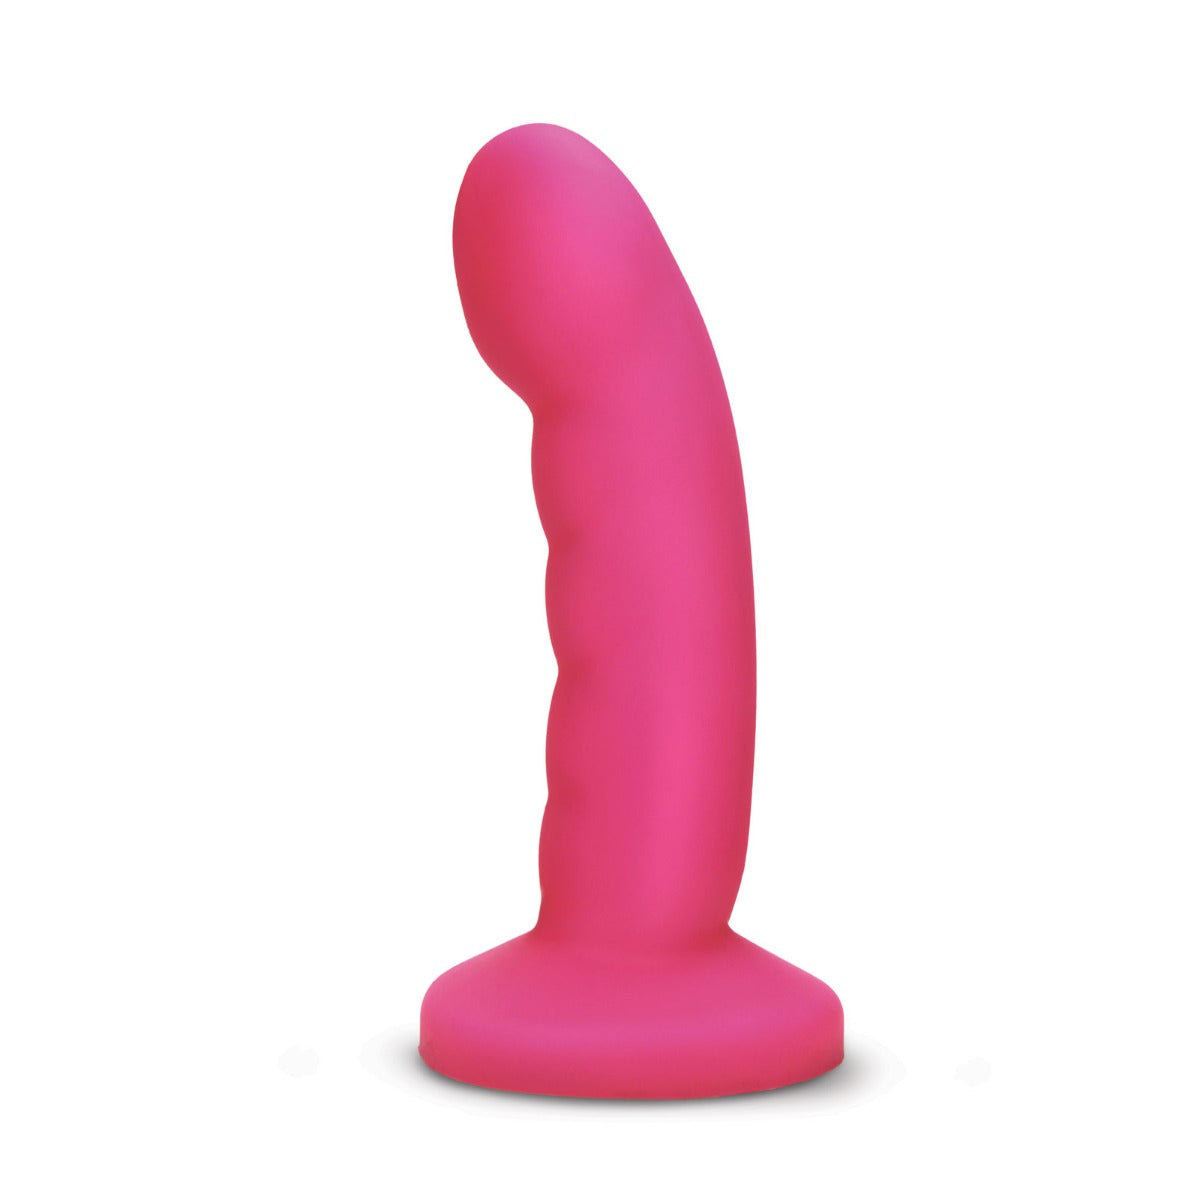 Suction Base Dildos Whipsmart 6 inch Curved Ripple Remote control Dildo - Hot Pink   